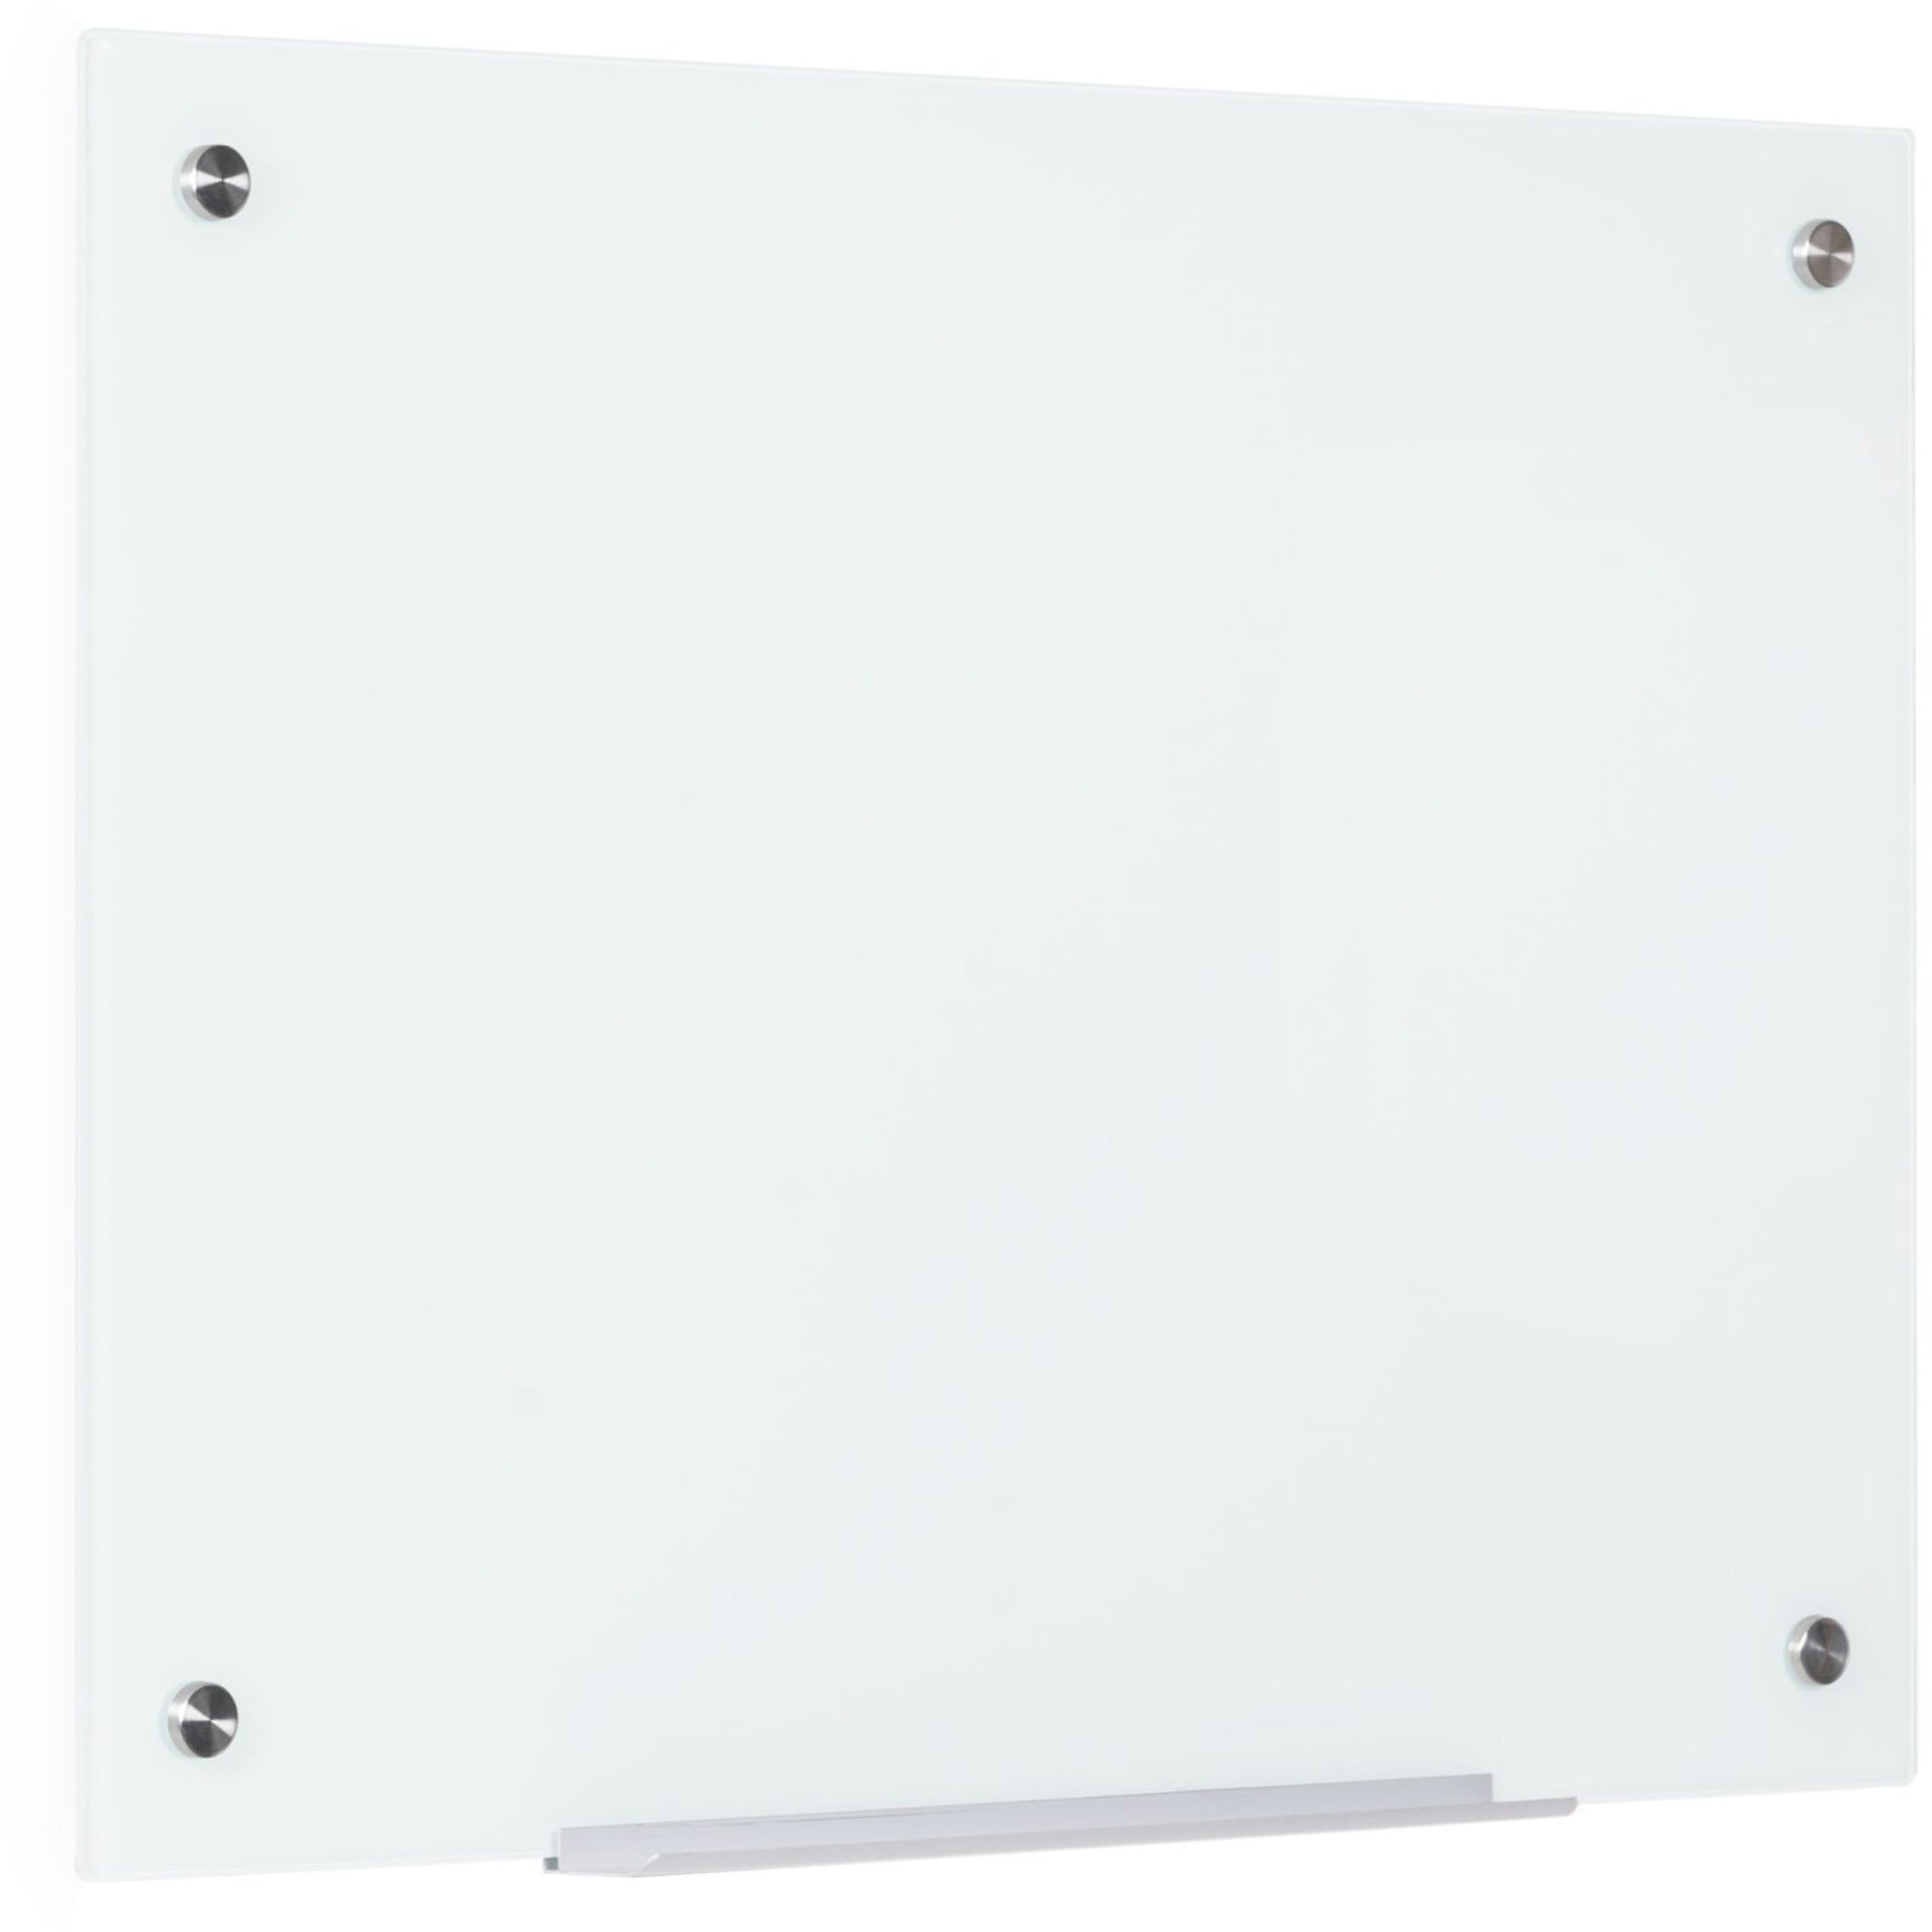 bi-silque-magnetic-glass-dry-erase-board-48-4-ft-width-x-96-8-ft-height-white-glass-surface-rectangle-horizontal-vertical-magnetic-1-each_bvcgl250107 - 4